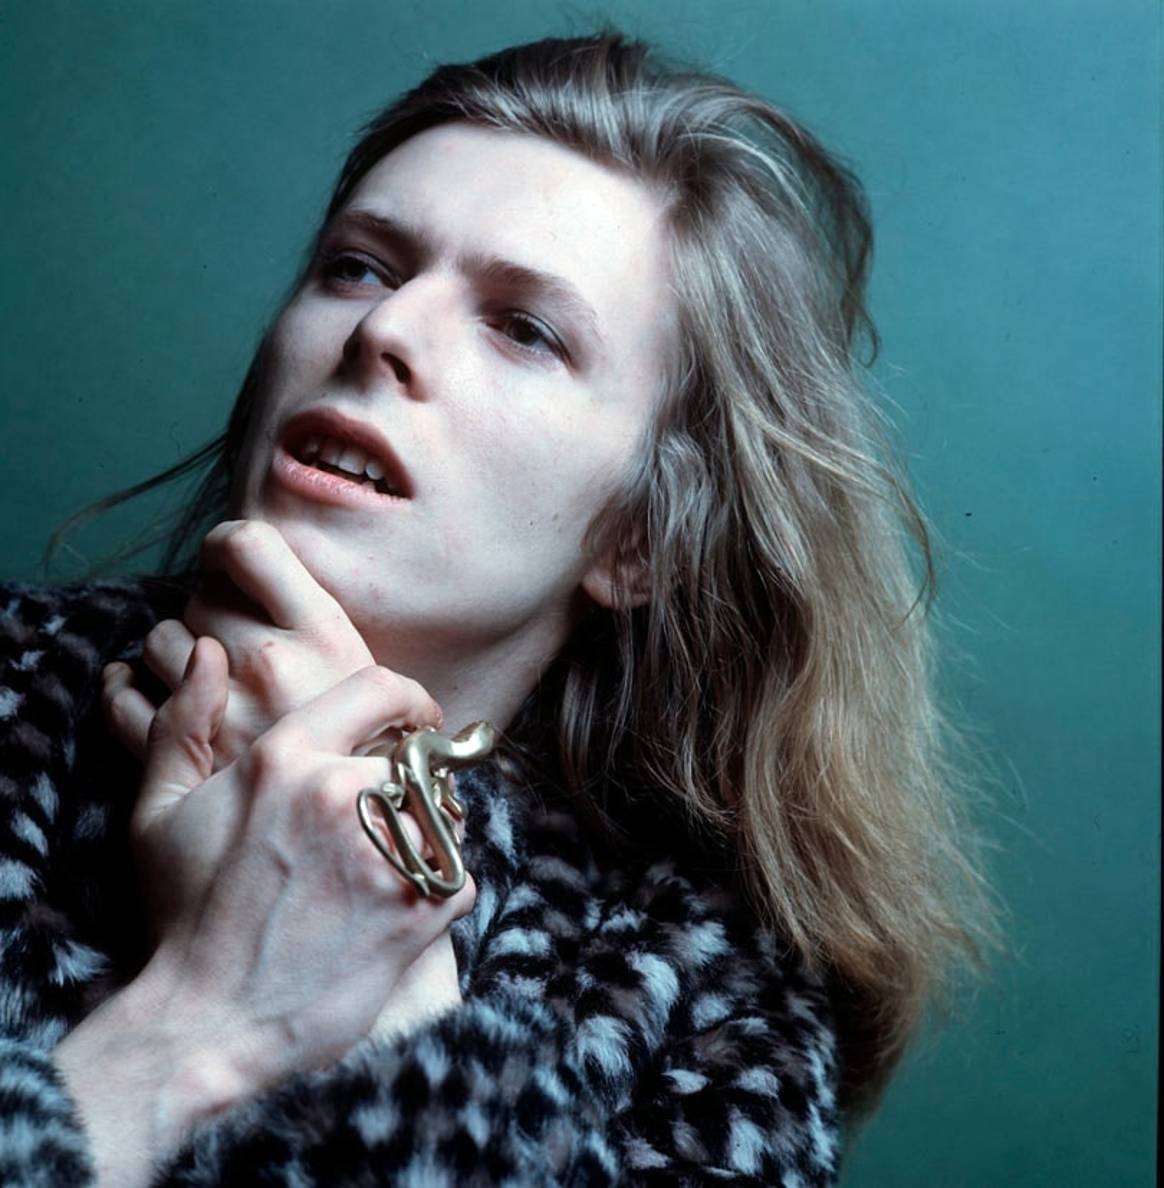 In Pictures: “David Bowie Is” Half a Century of Fashion